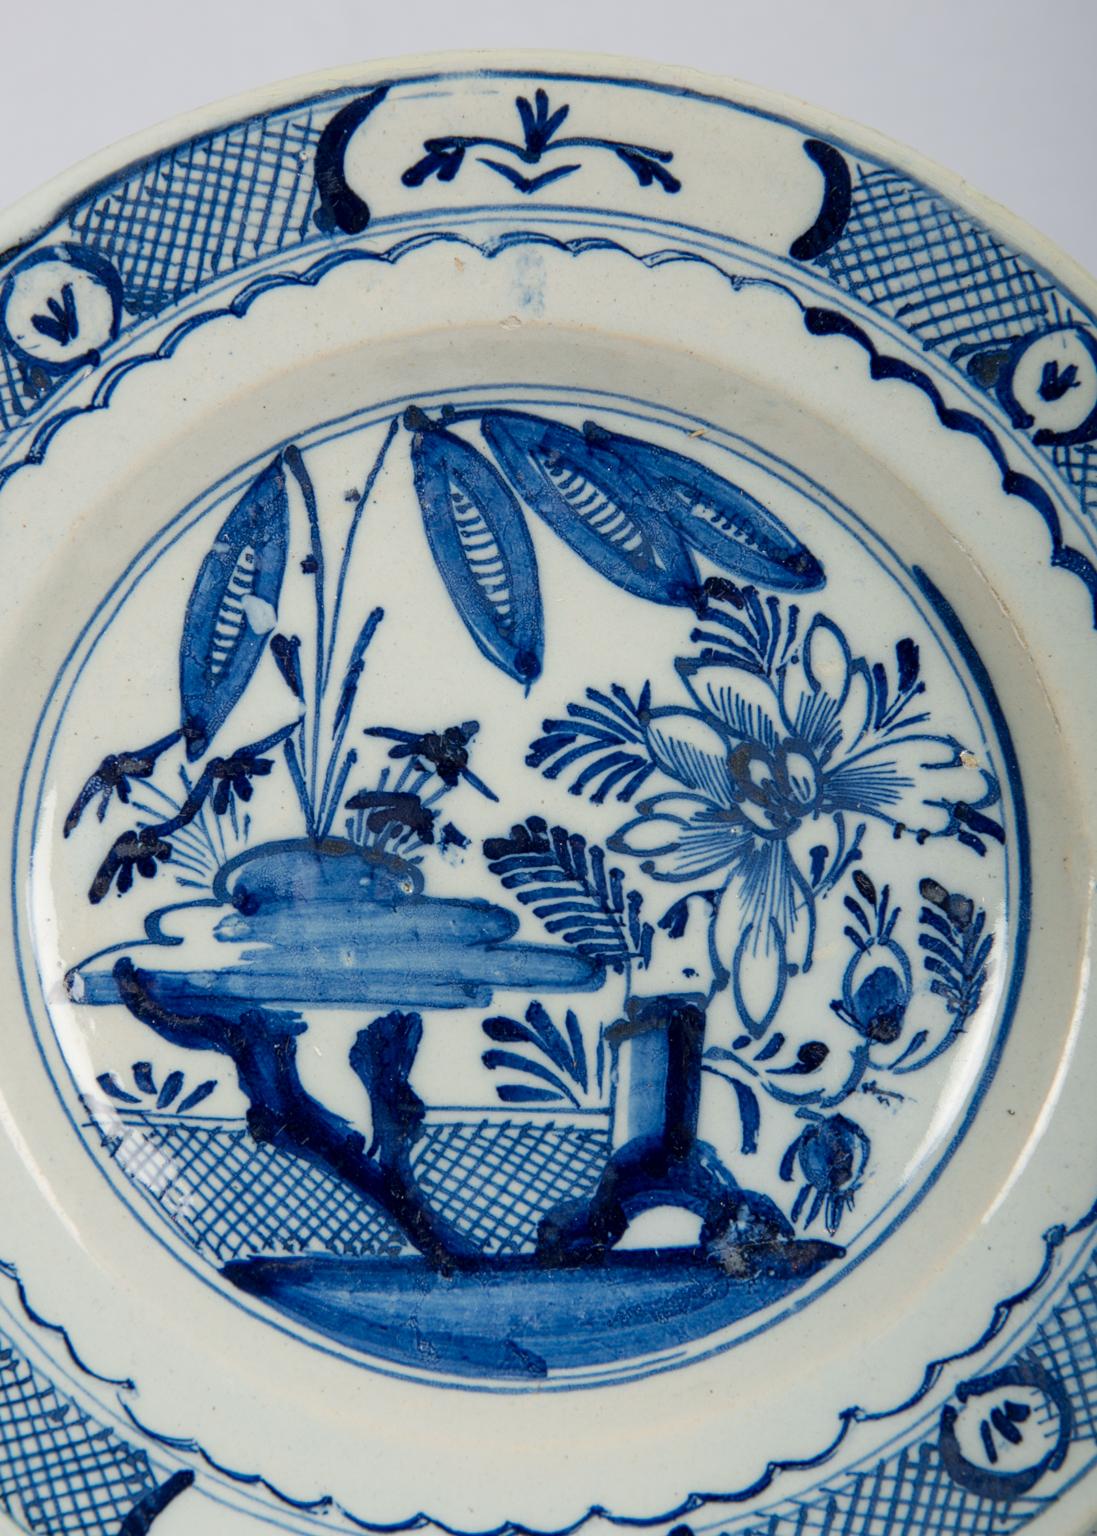 We are pleased to offer this set of six blue and white delft dishes made in The Netherlands in the last quarter of the 18th century. The dishes are decorated in several shades of cobalt blue. The center of each dish shows a garden scene. We see an